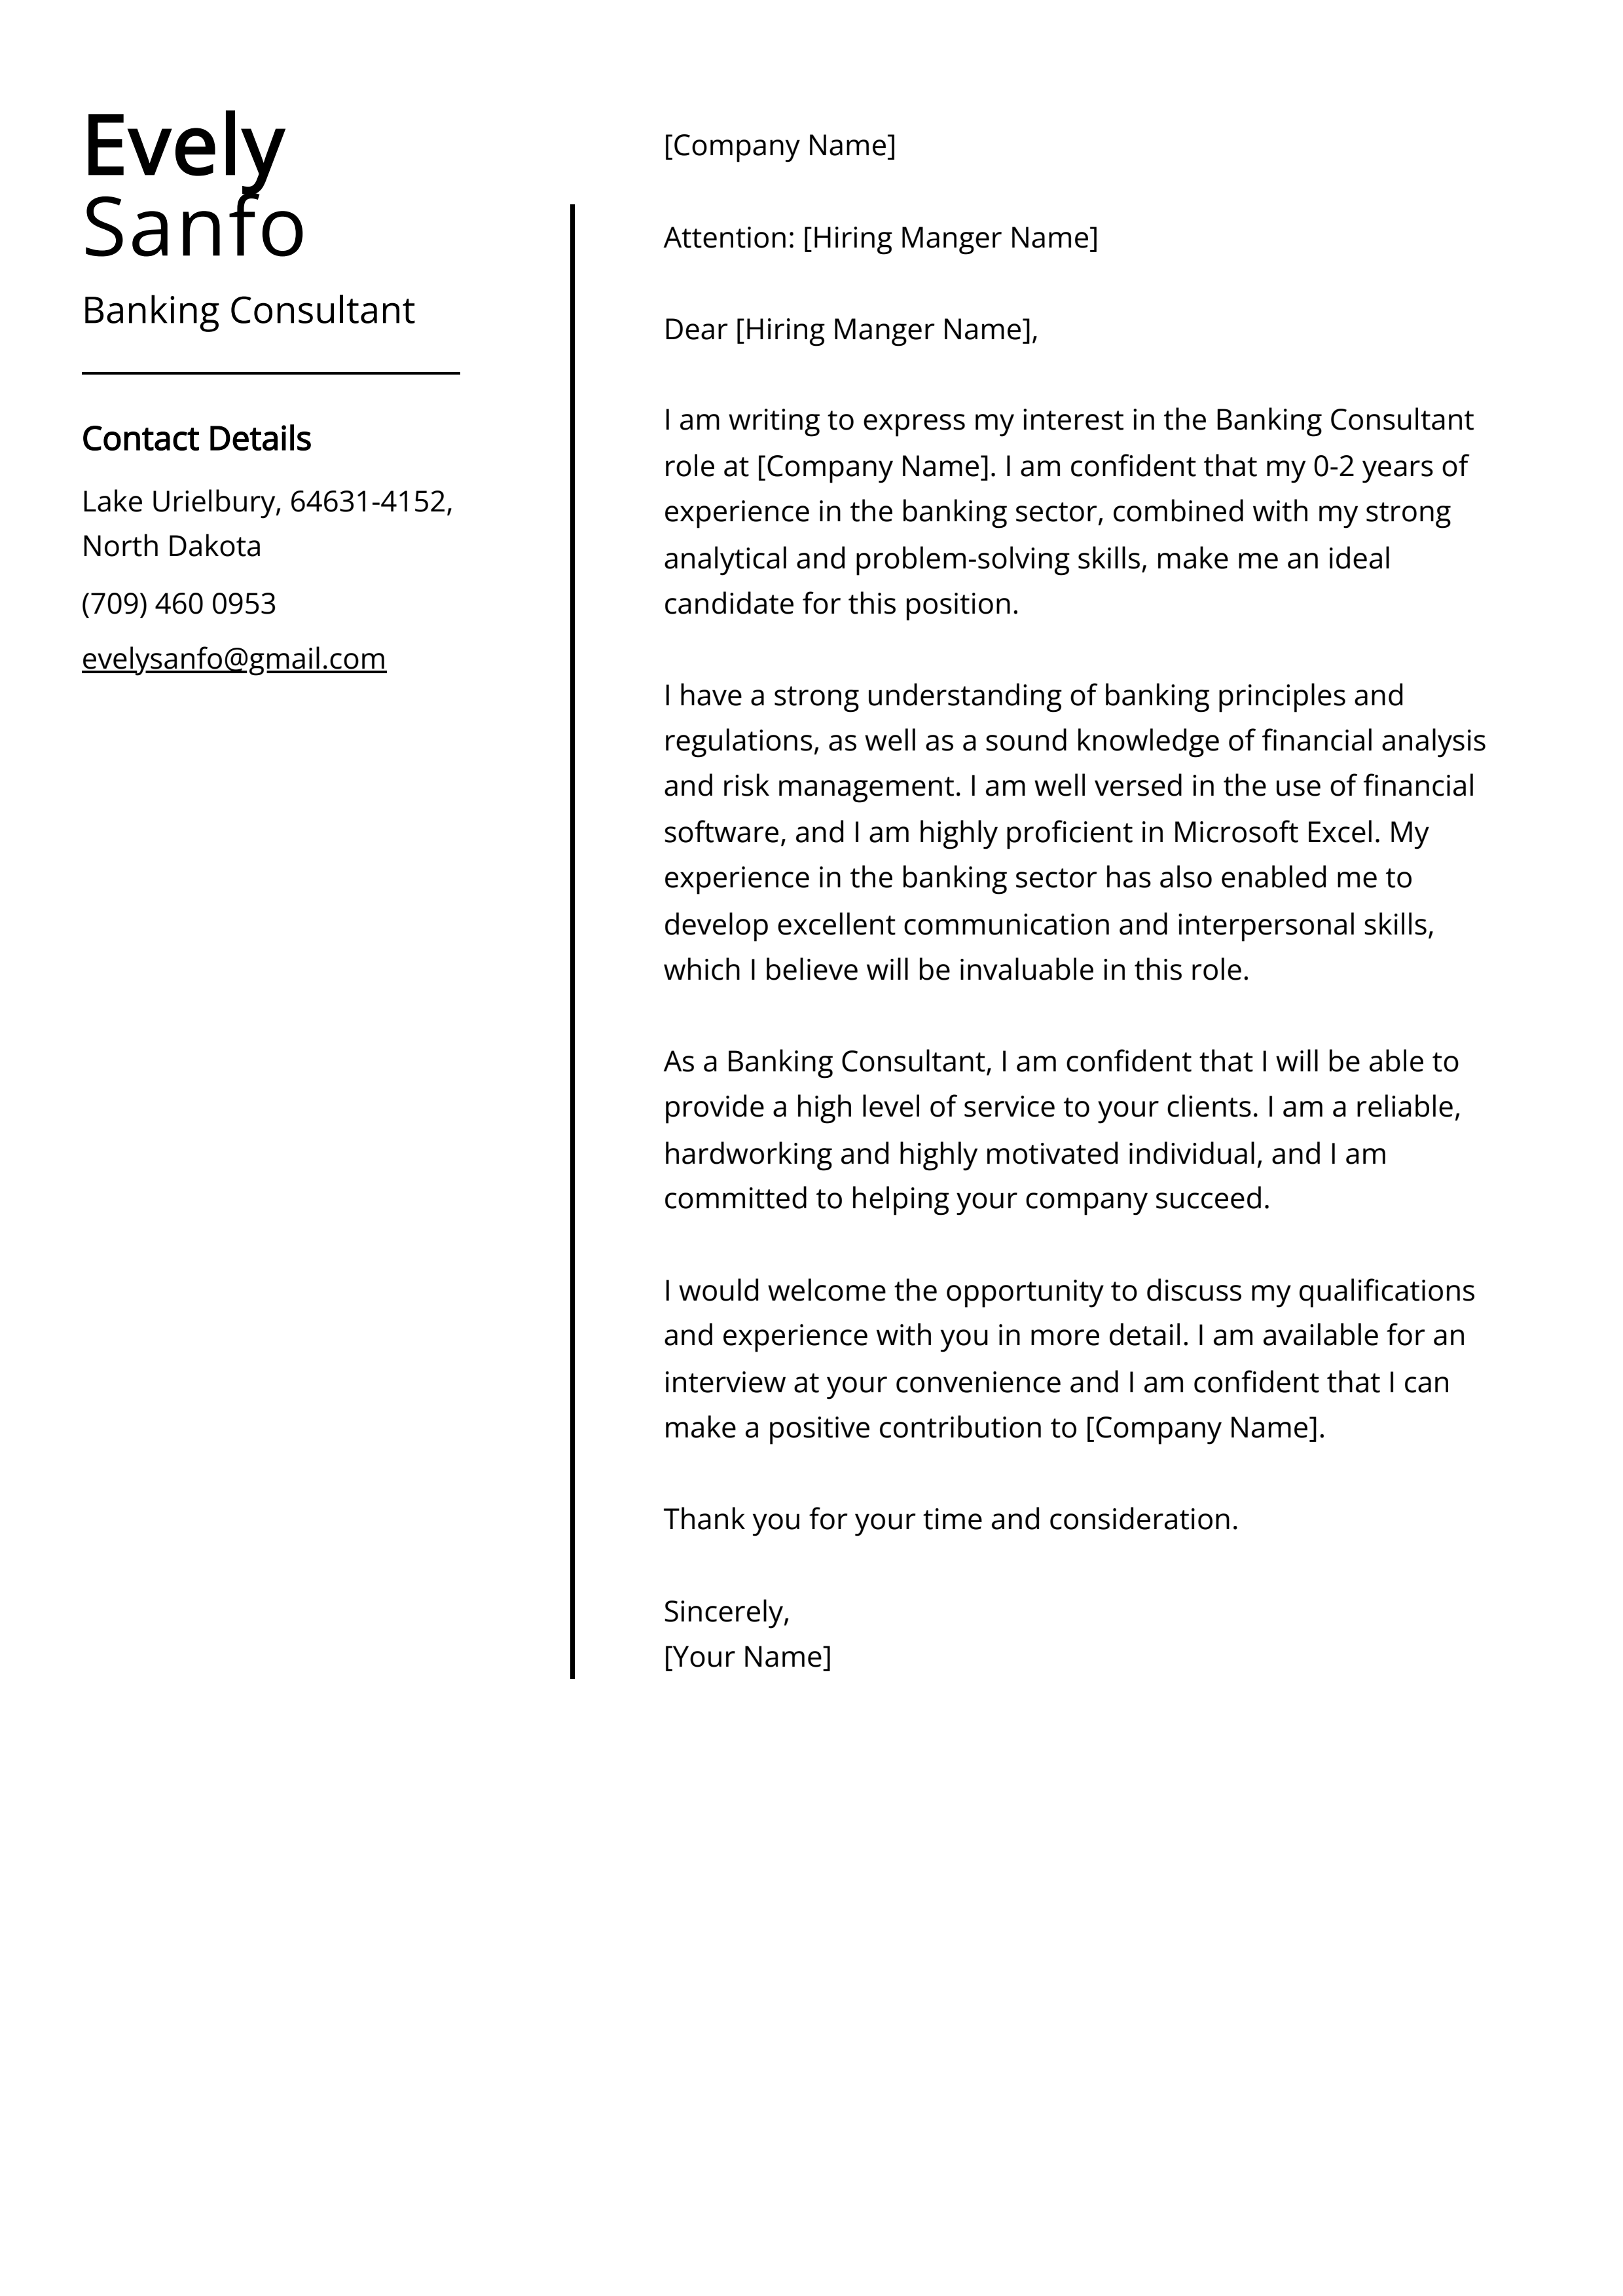 Banking Consultant Cover Letter Example